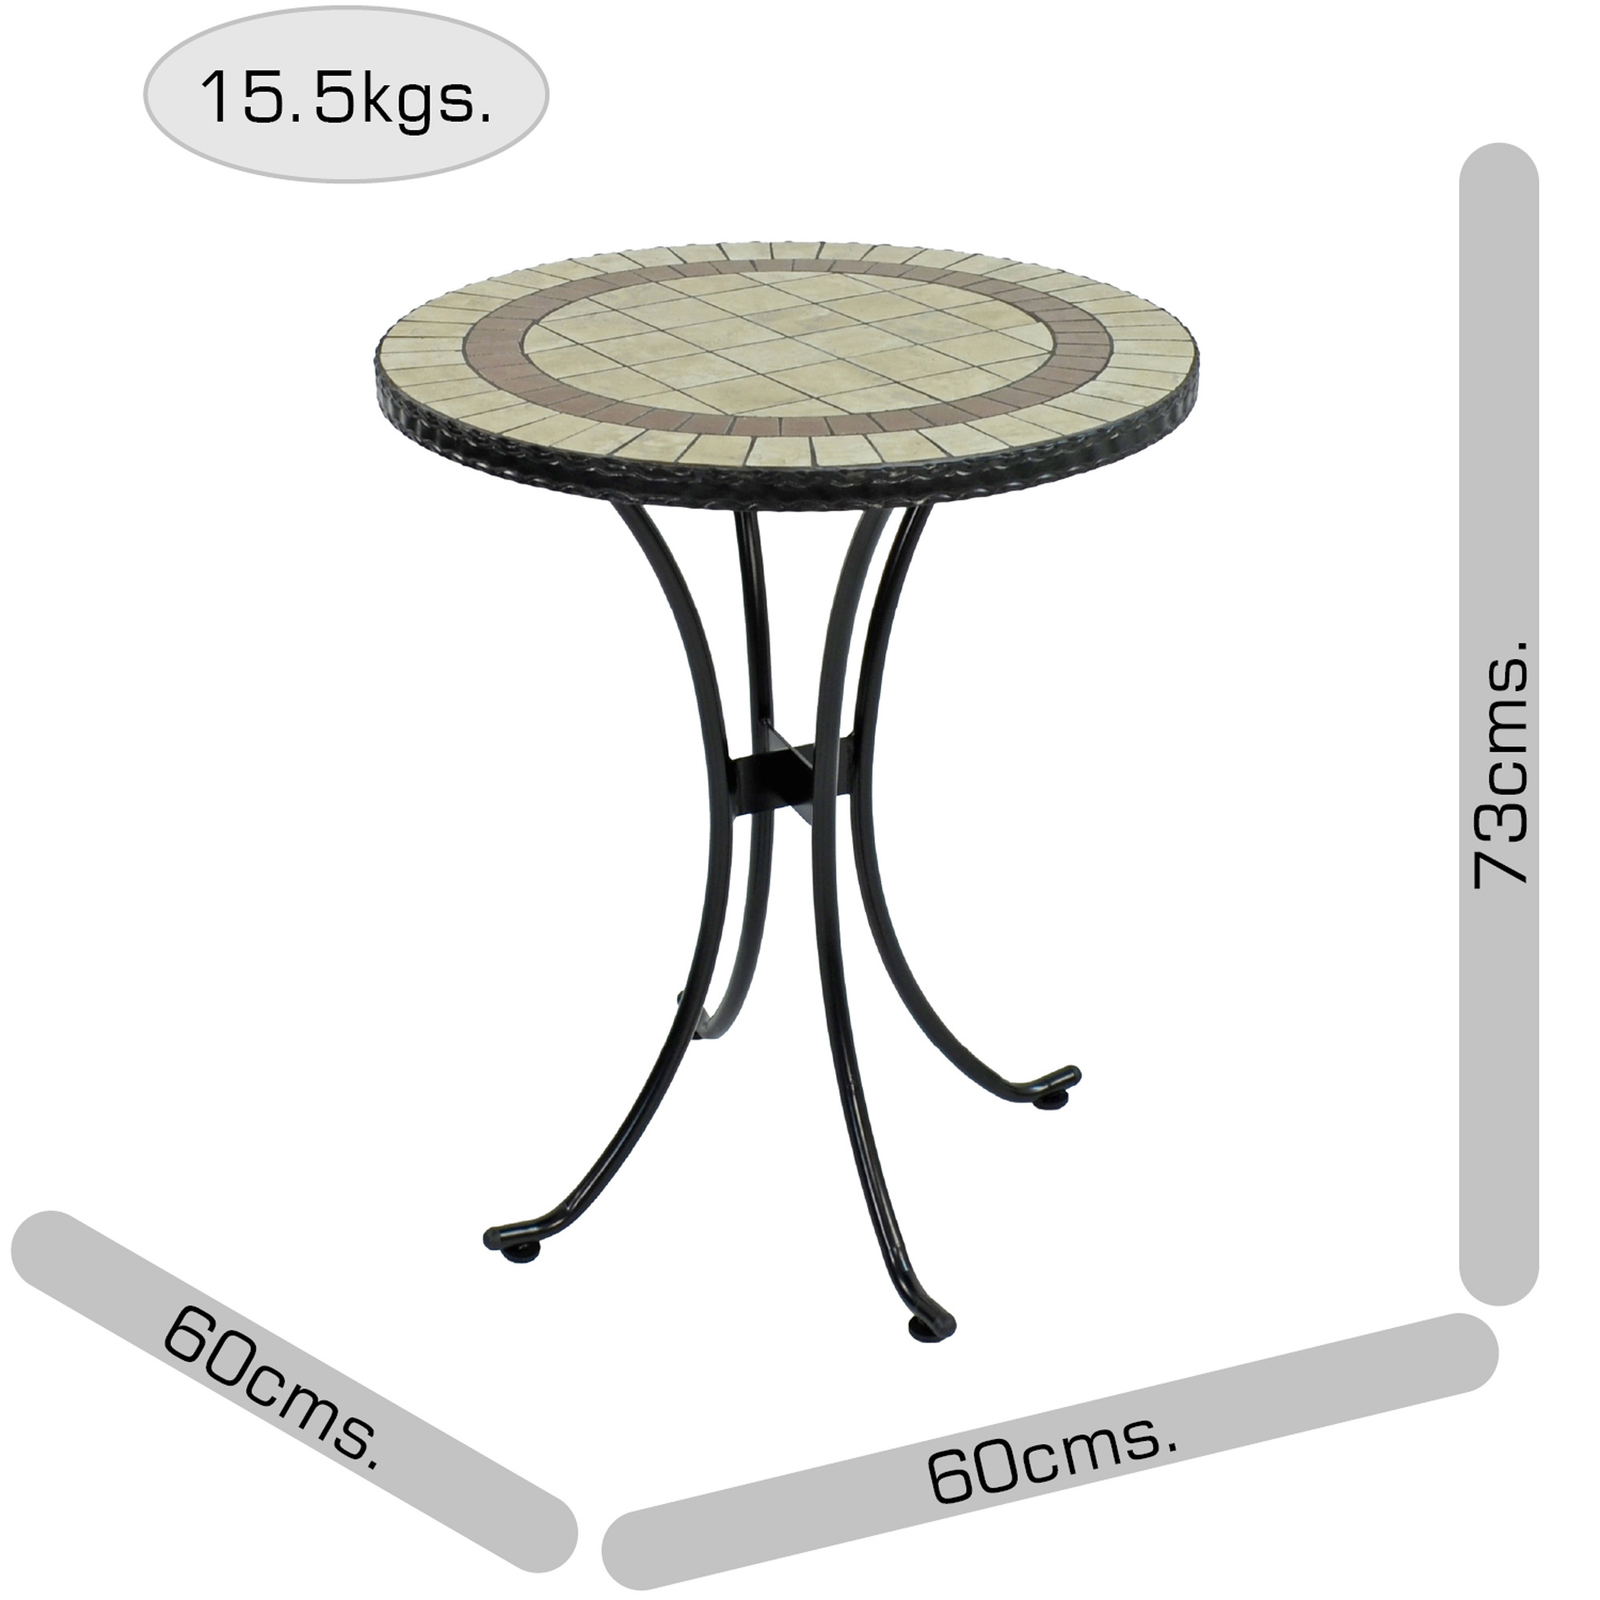 Exclusive Garden Henley 60 cm Round Table with 2 San Remo Chairs Garden Set Dining Set Dining Sets Exclusive Garden   